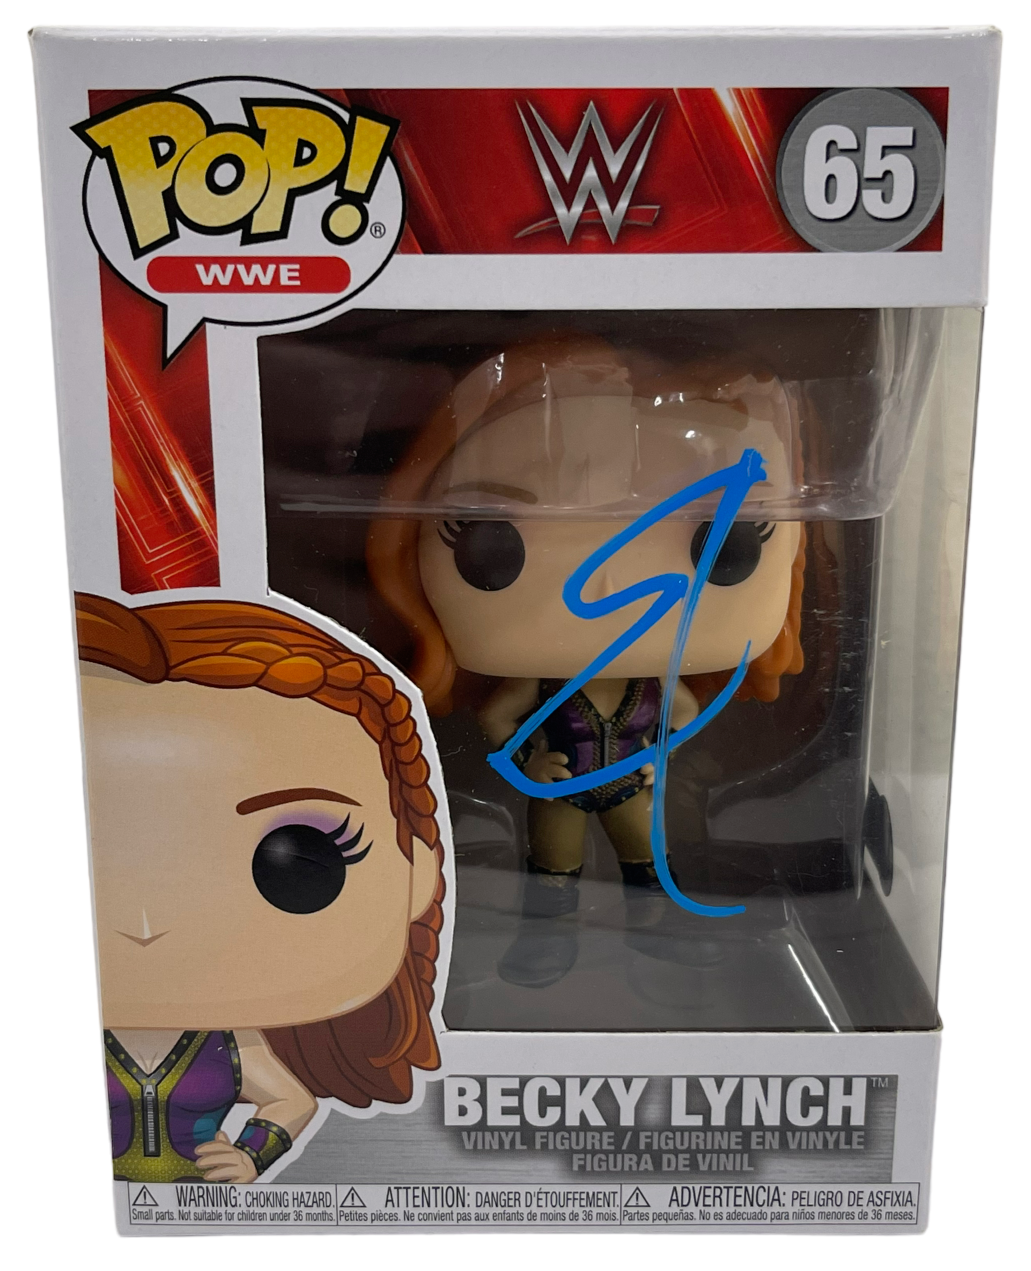 Becky Lynch Authentic Autographed Becky Lynch WWE 65 Funko Pop Figure